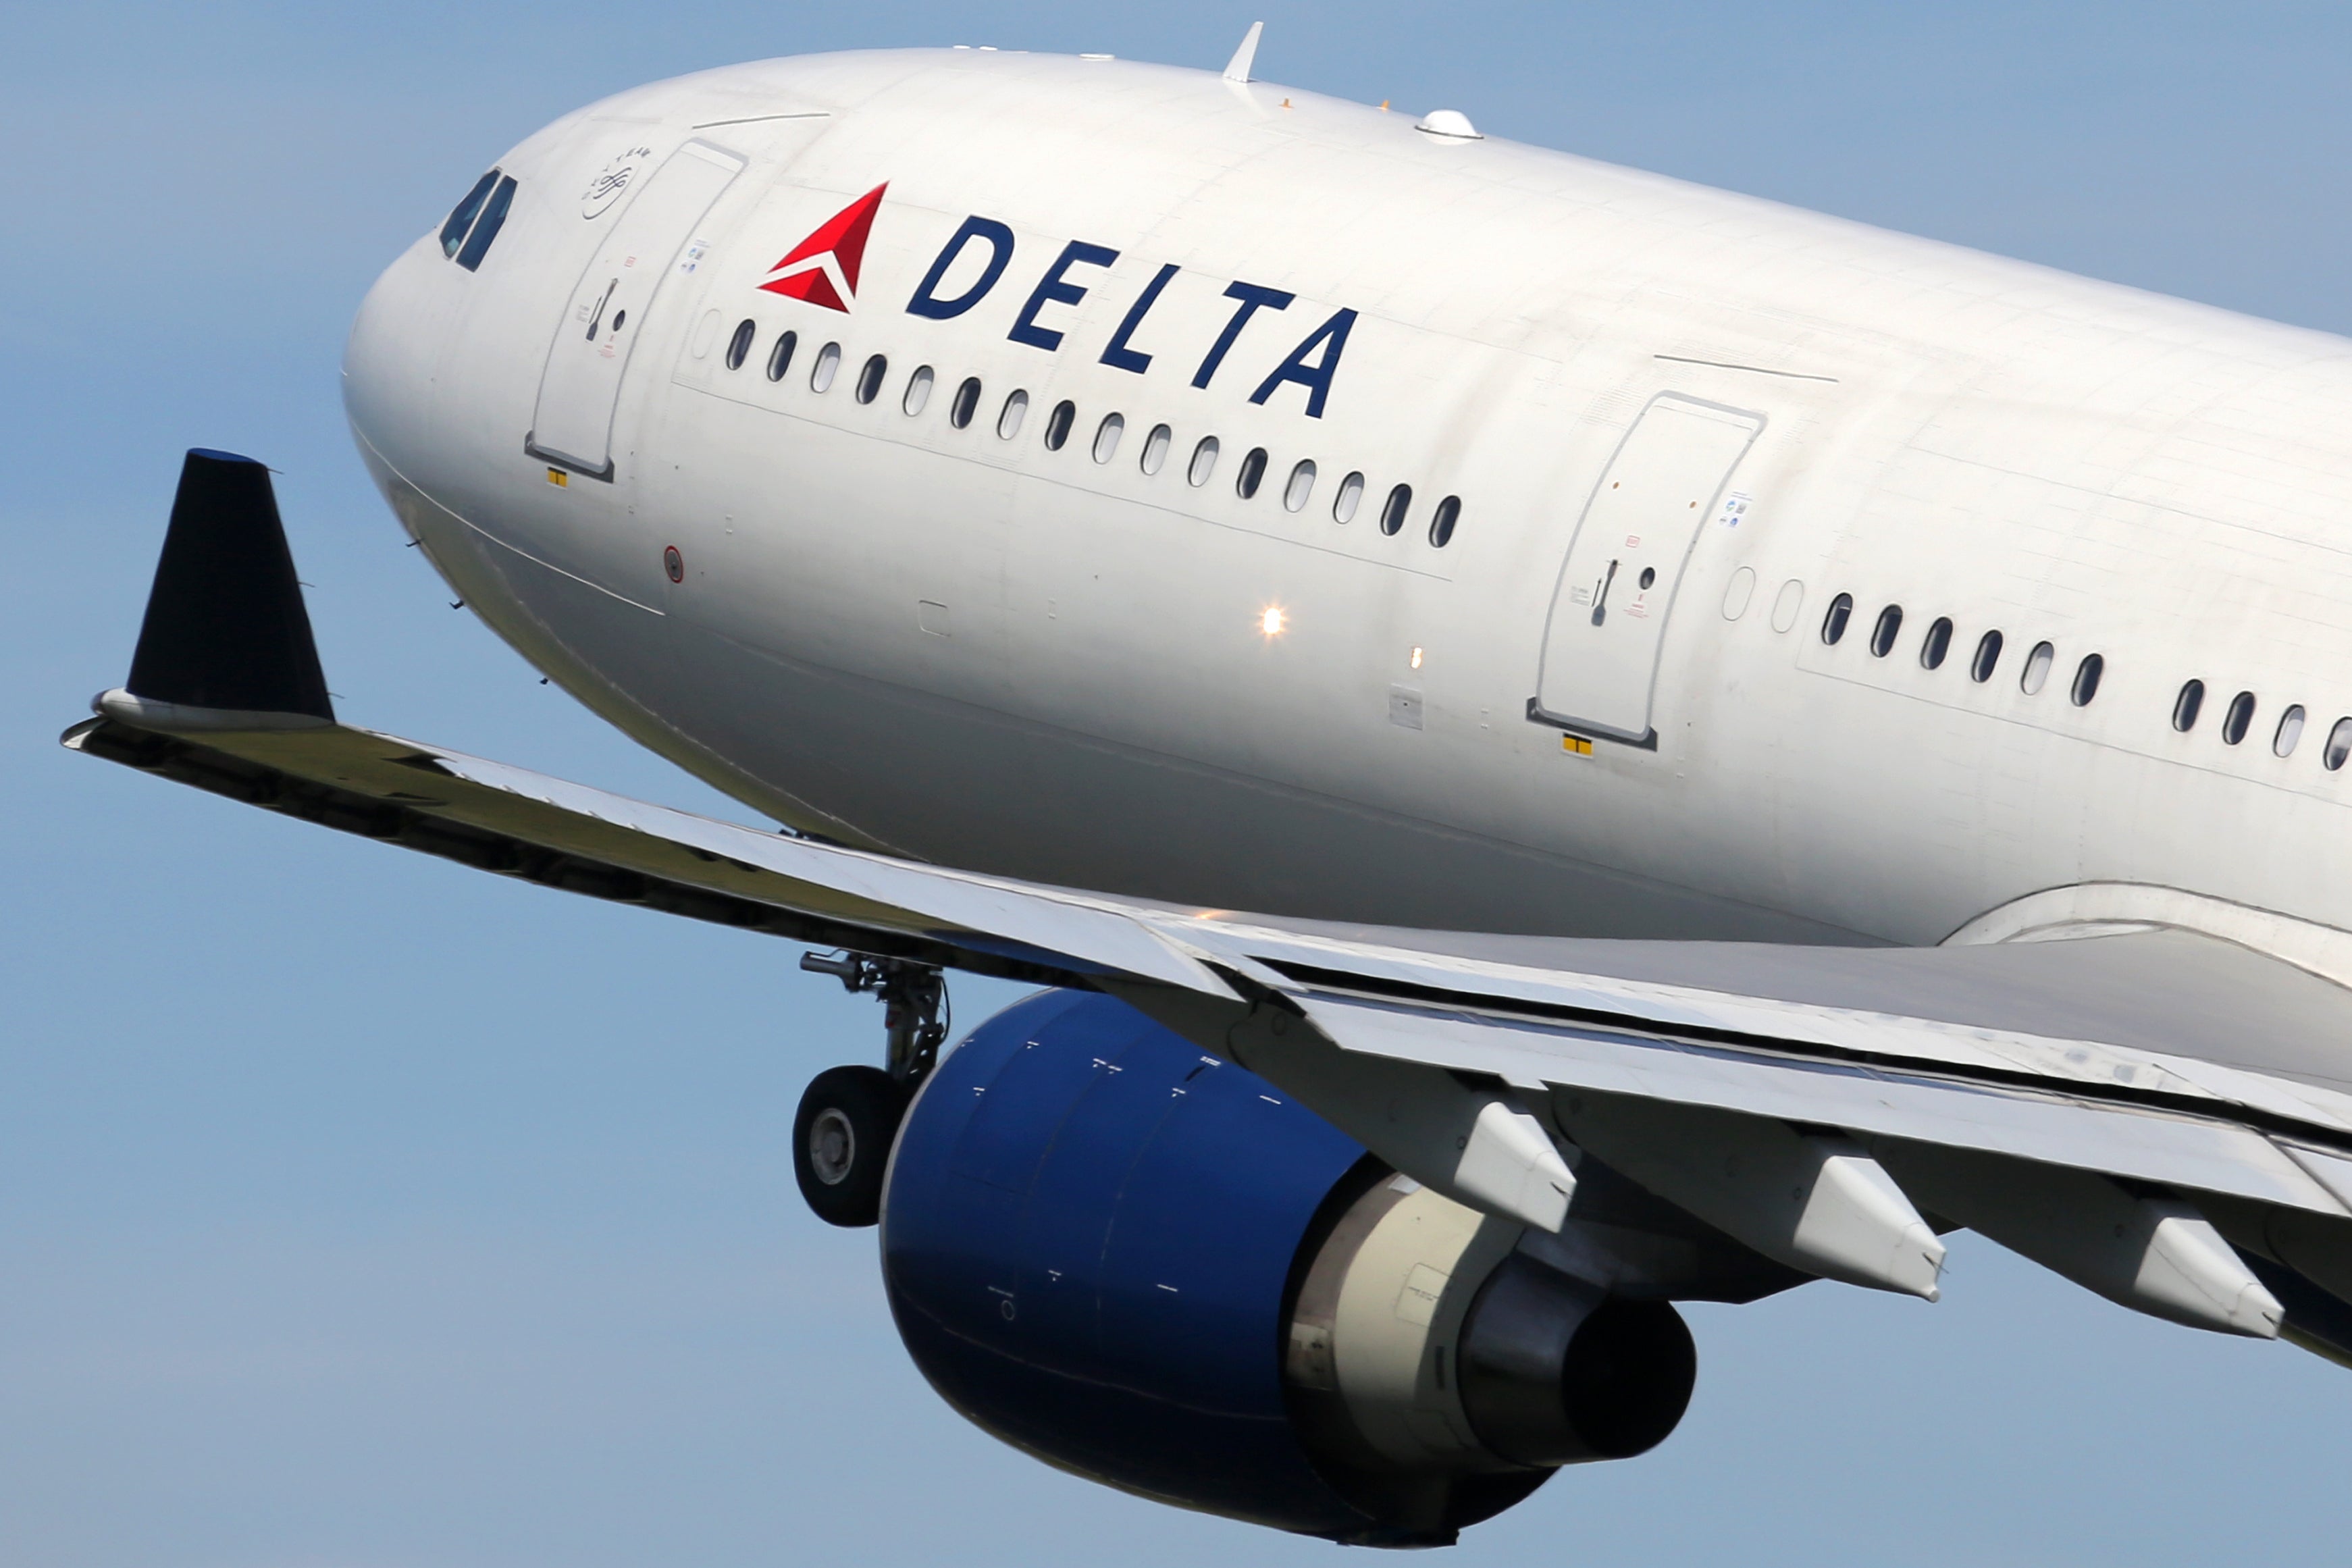 Delta Air Lines Has Big Plans to Become Completely Carbon Neutral